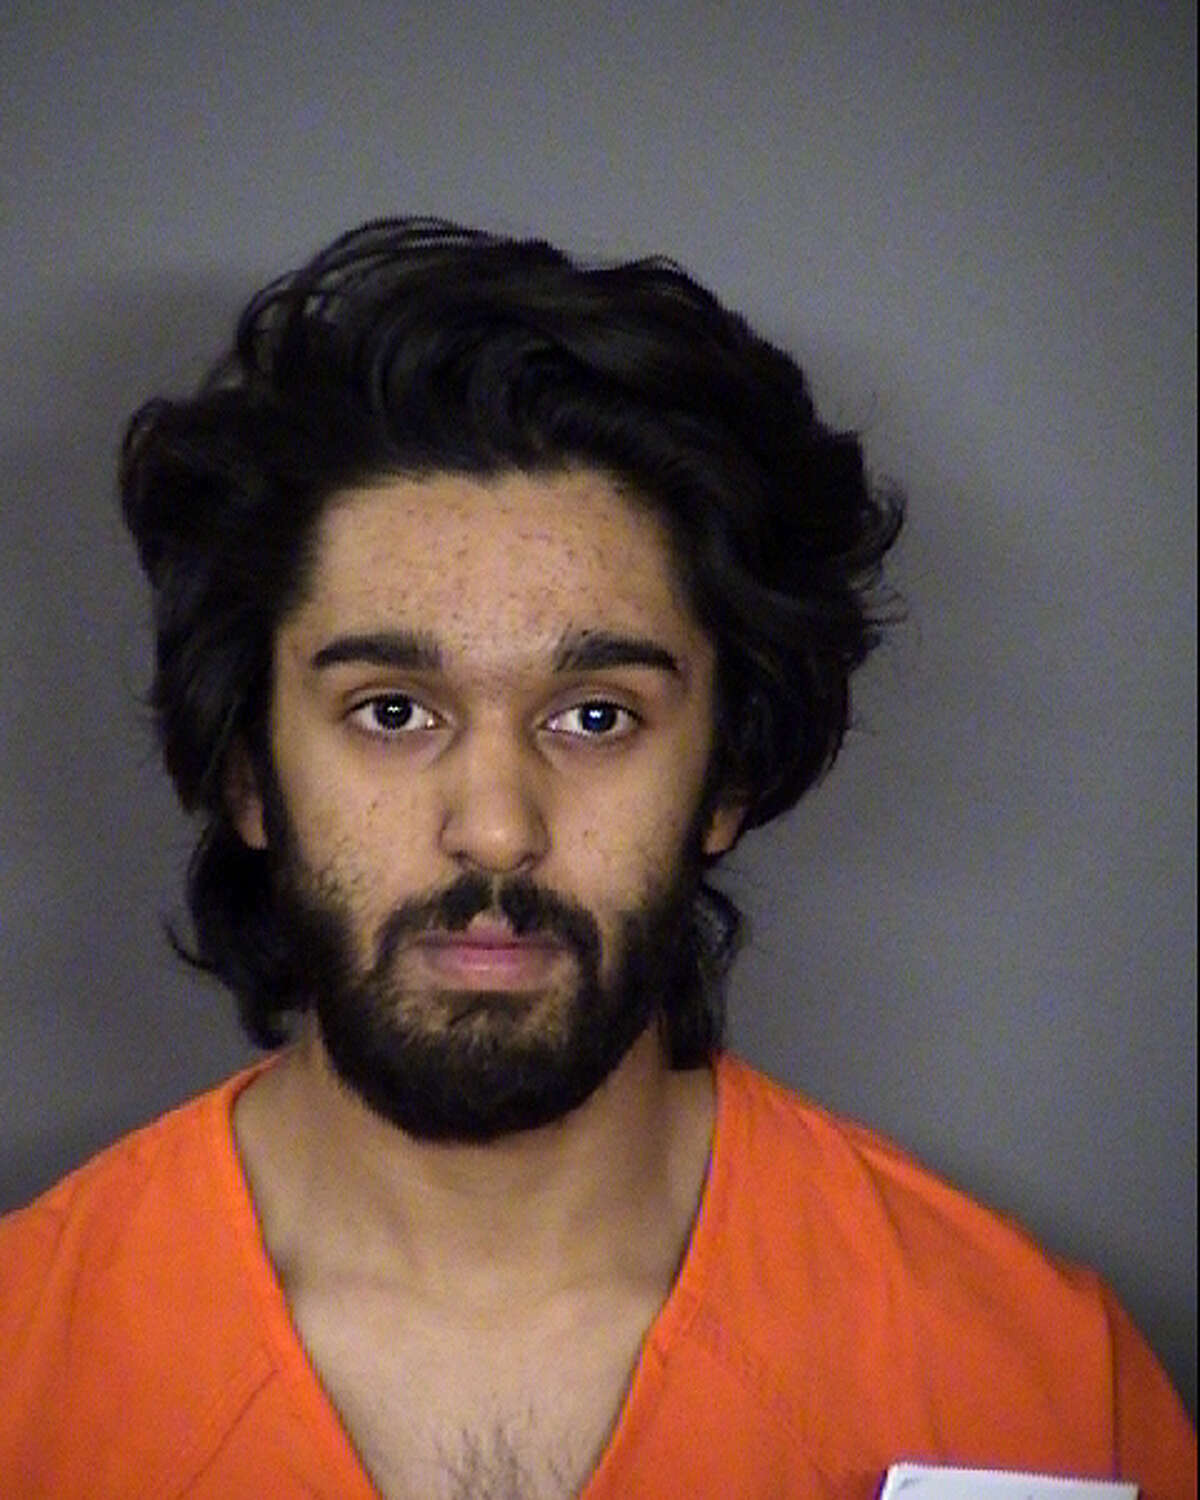 Nawaf Nuri, 22, faces an aggravated robbery charge. He was booked into the Bexar County Jail on a $50,000 bond.